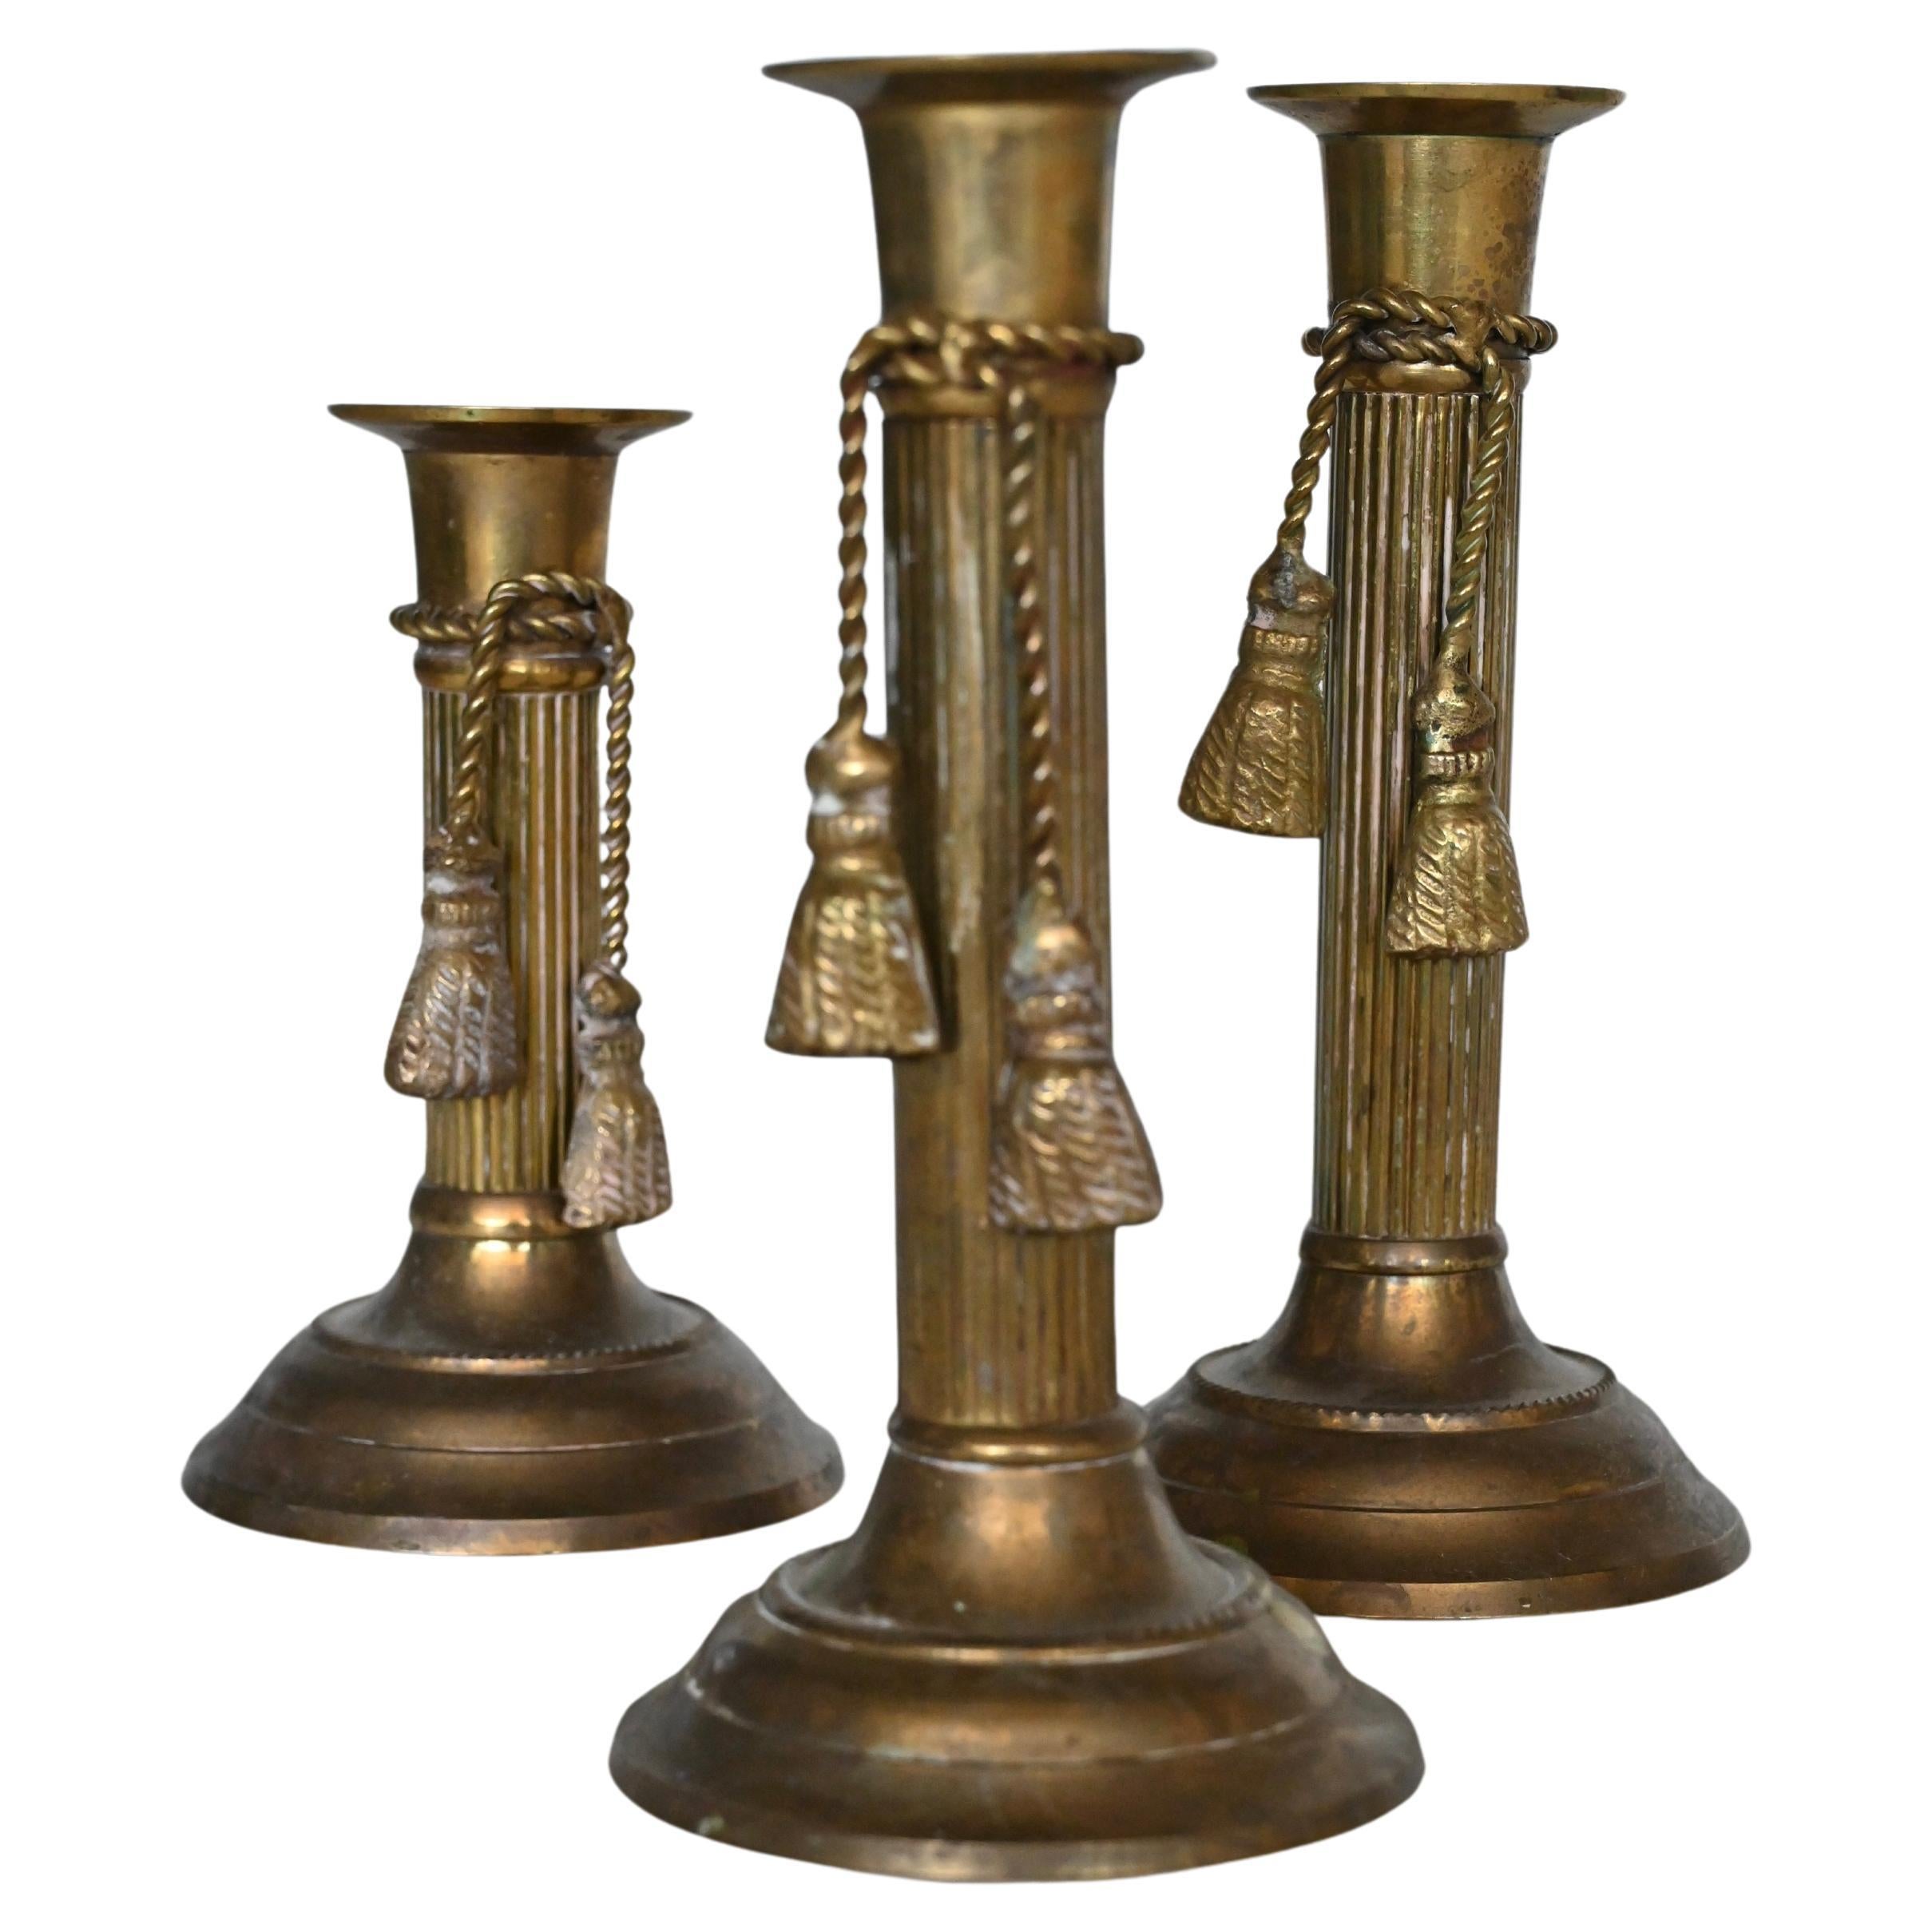 Set of three brass candlesticks with tassel detail, mid 20th century. For Sale